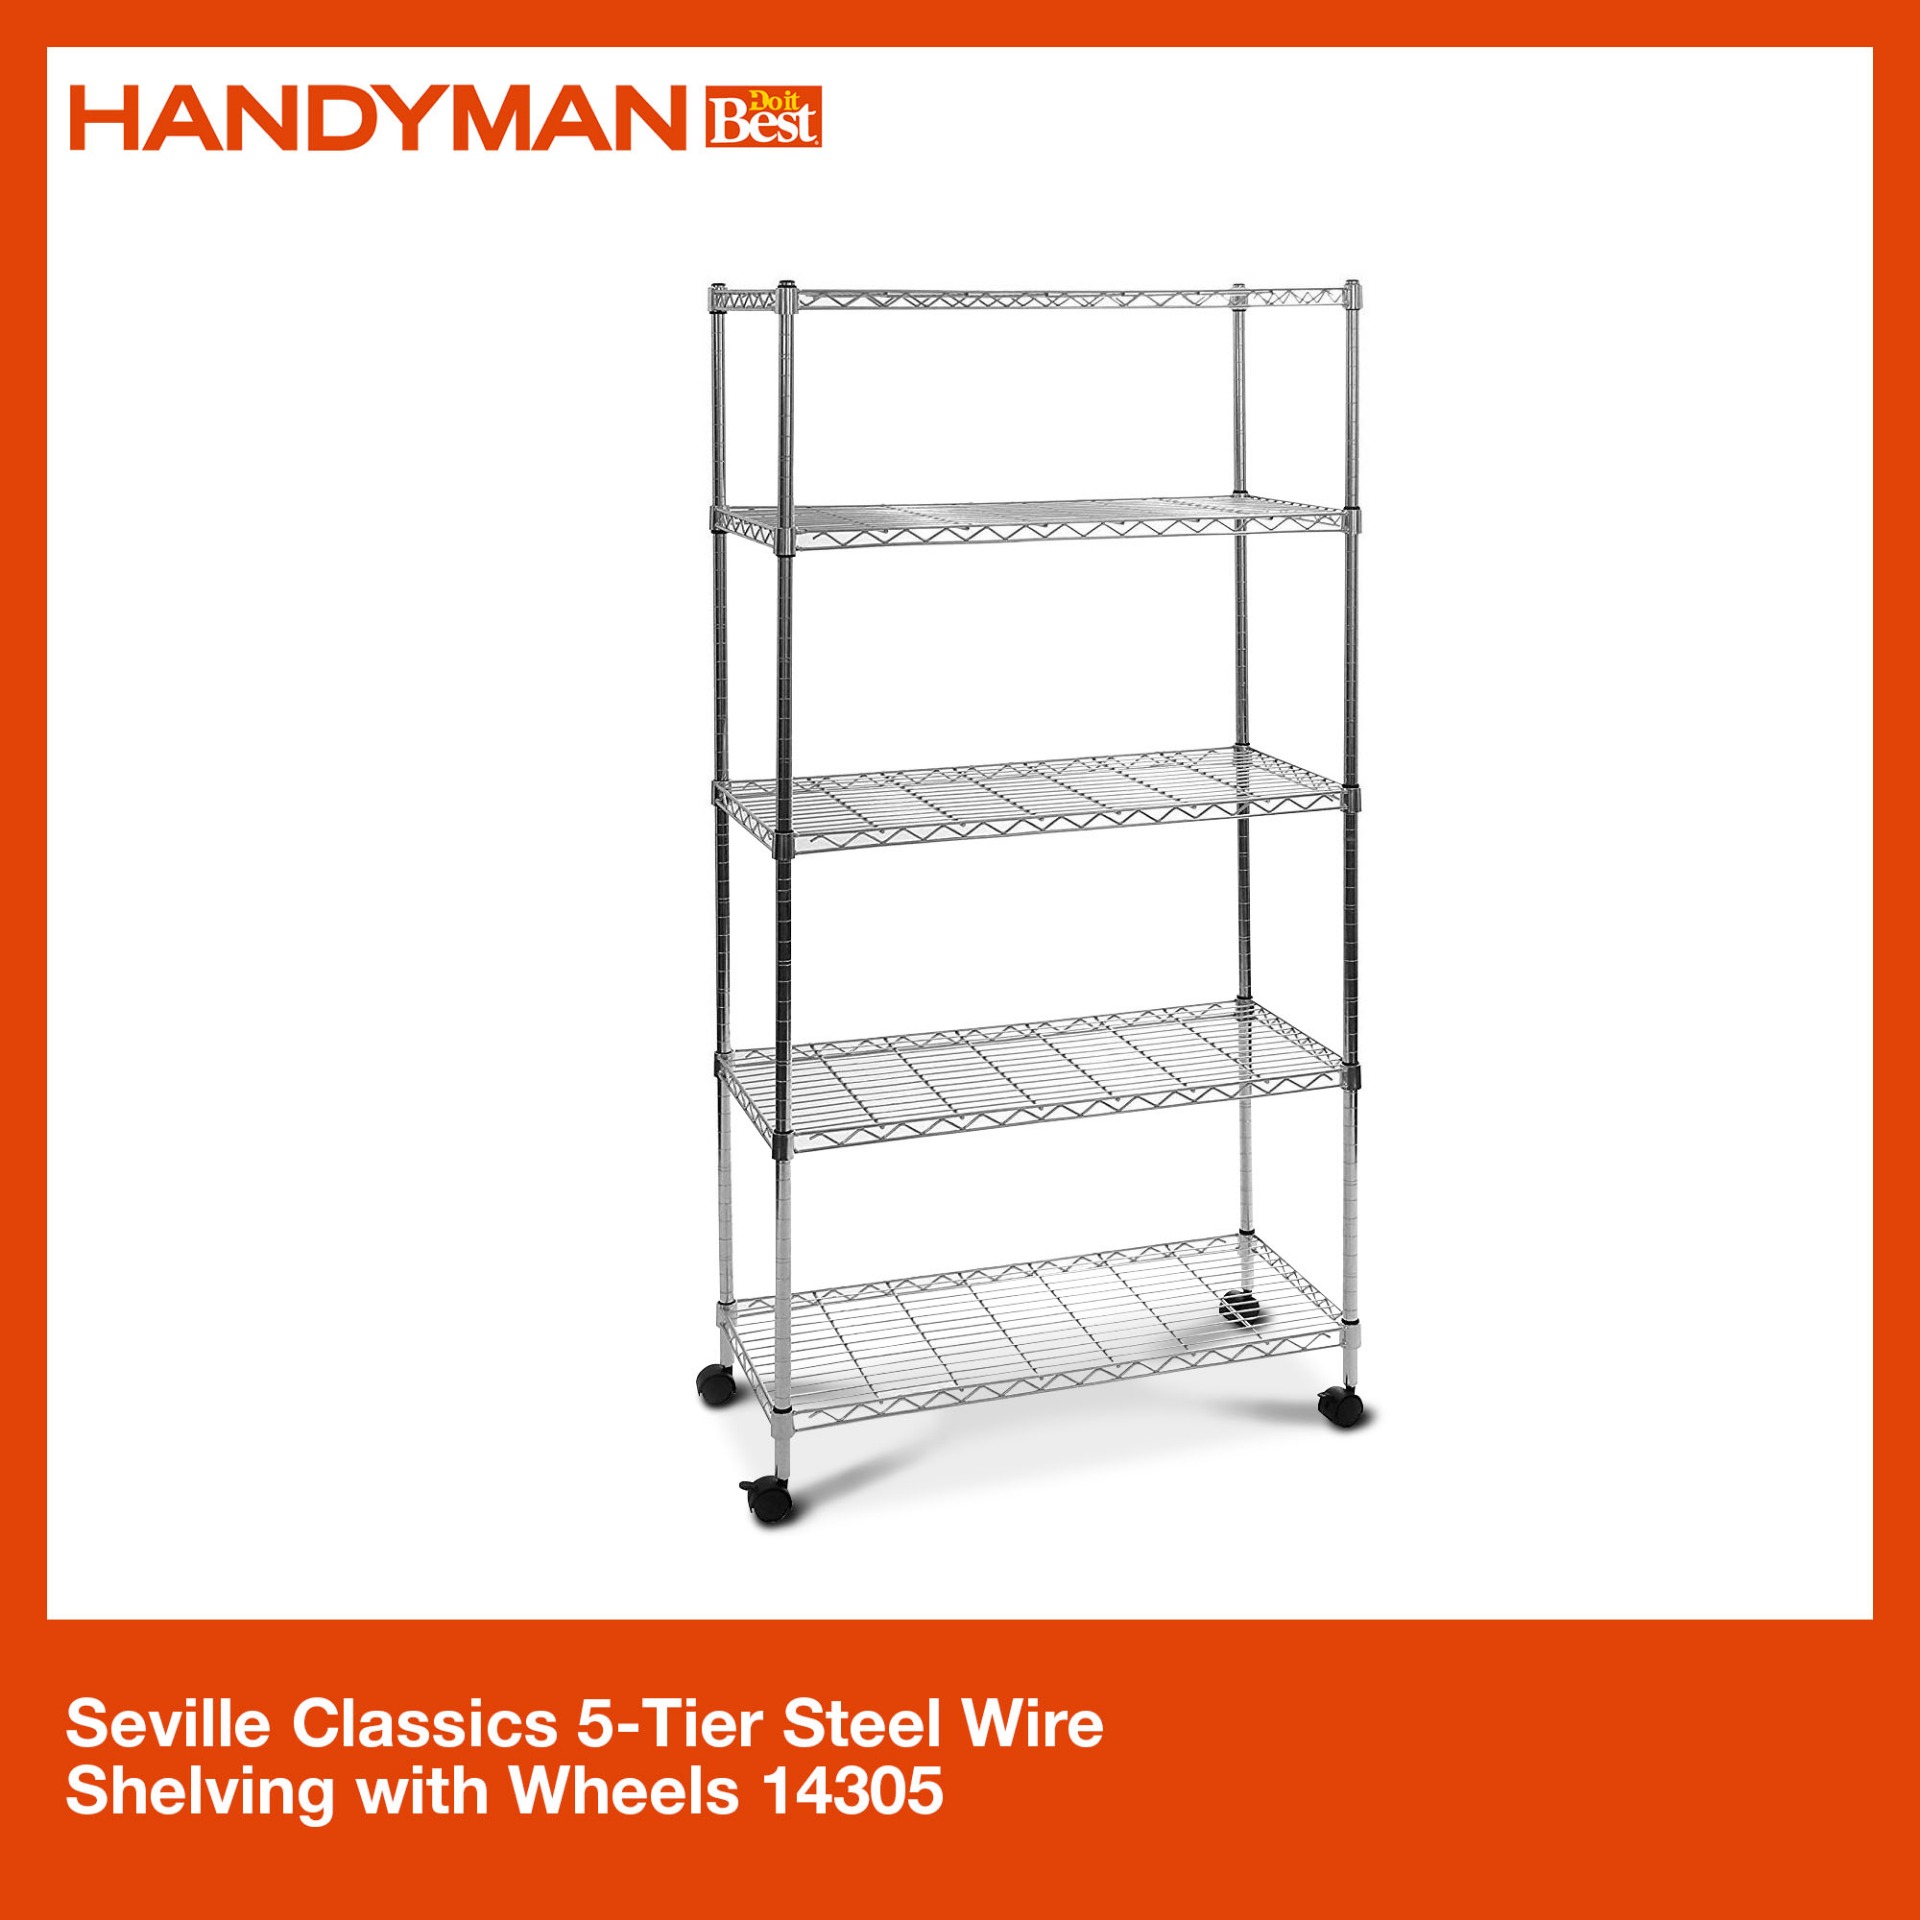 Seville Classics 5 Tier Steel Wire, 5 Tier Wire Shelving With Wheels